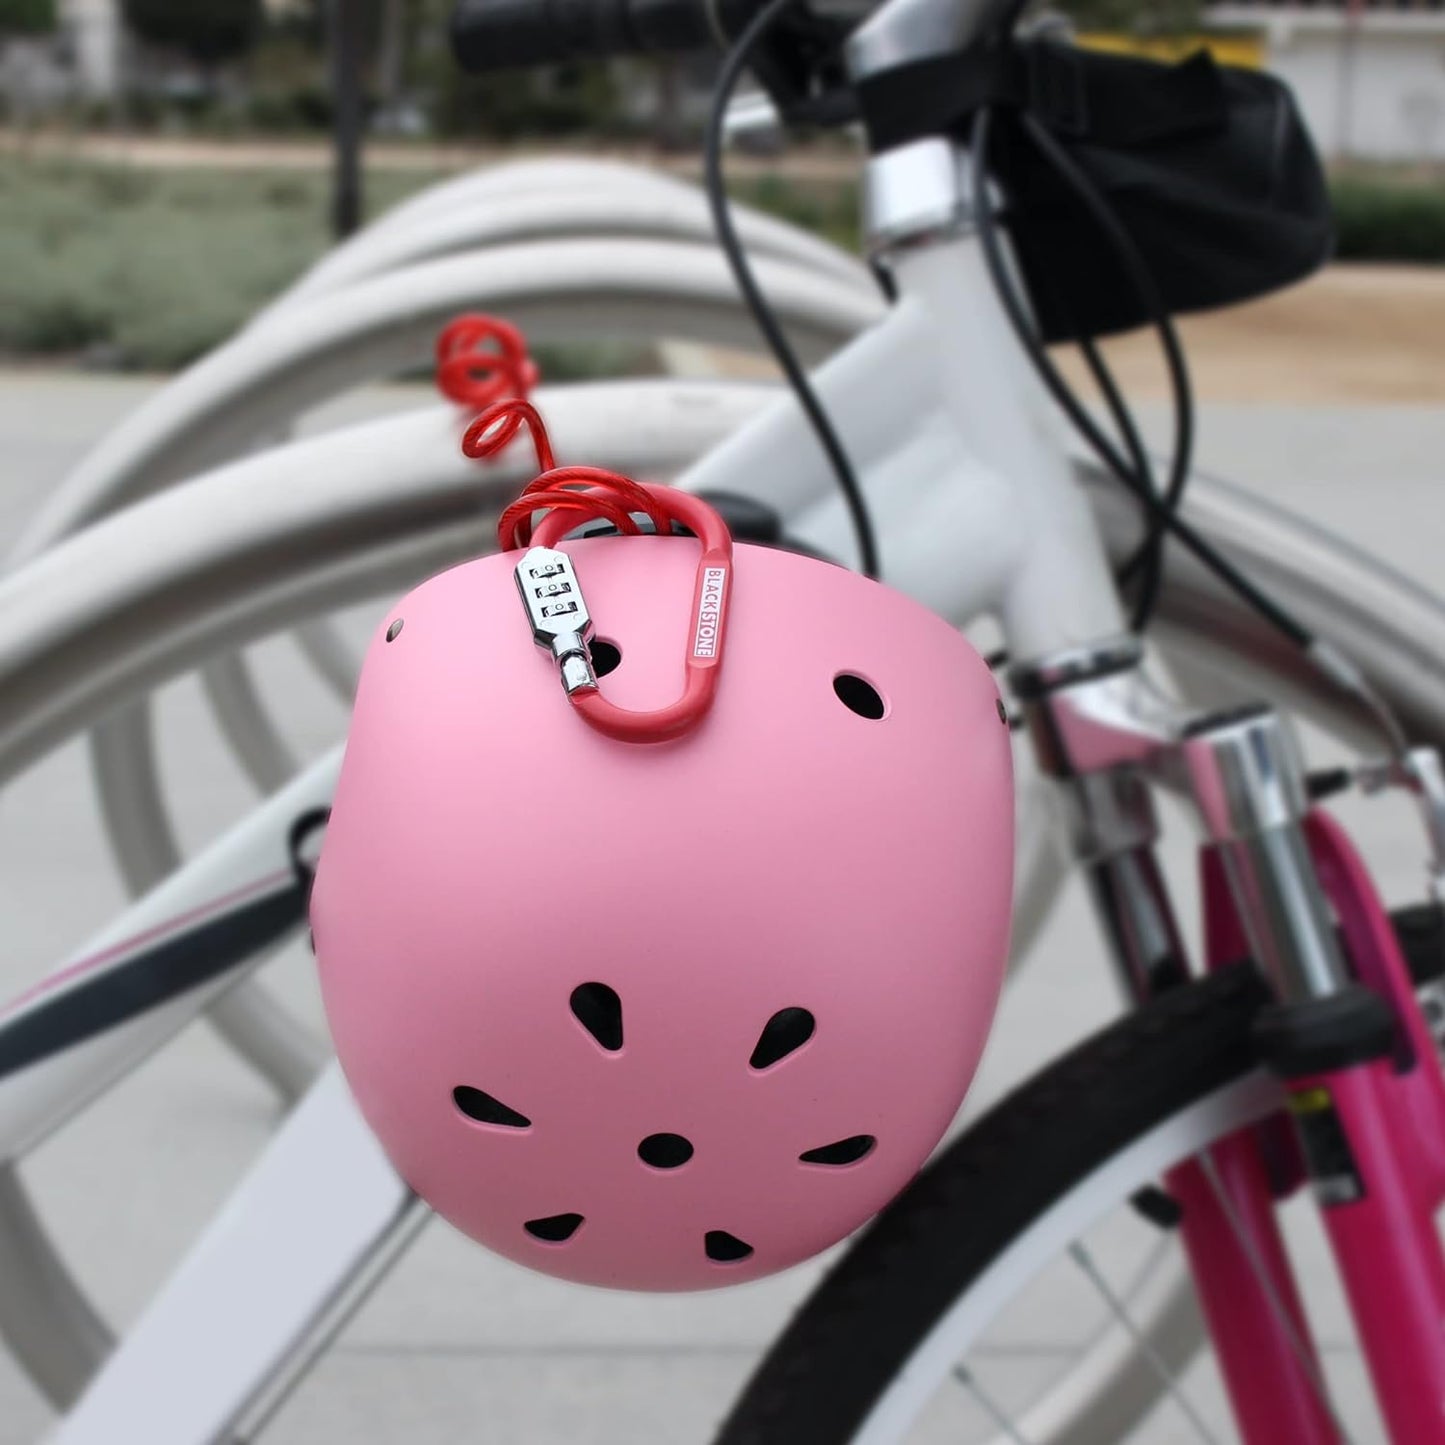 Pink helmet secured with a red Black Stone combination lock to a white bike on a bike rack, with soft focus on the surrounding environment